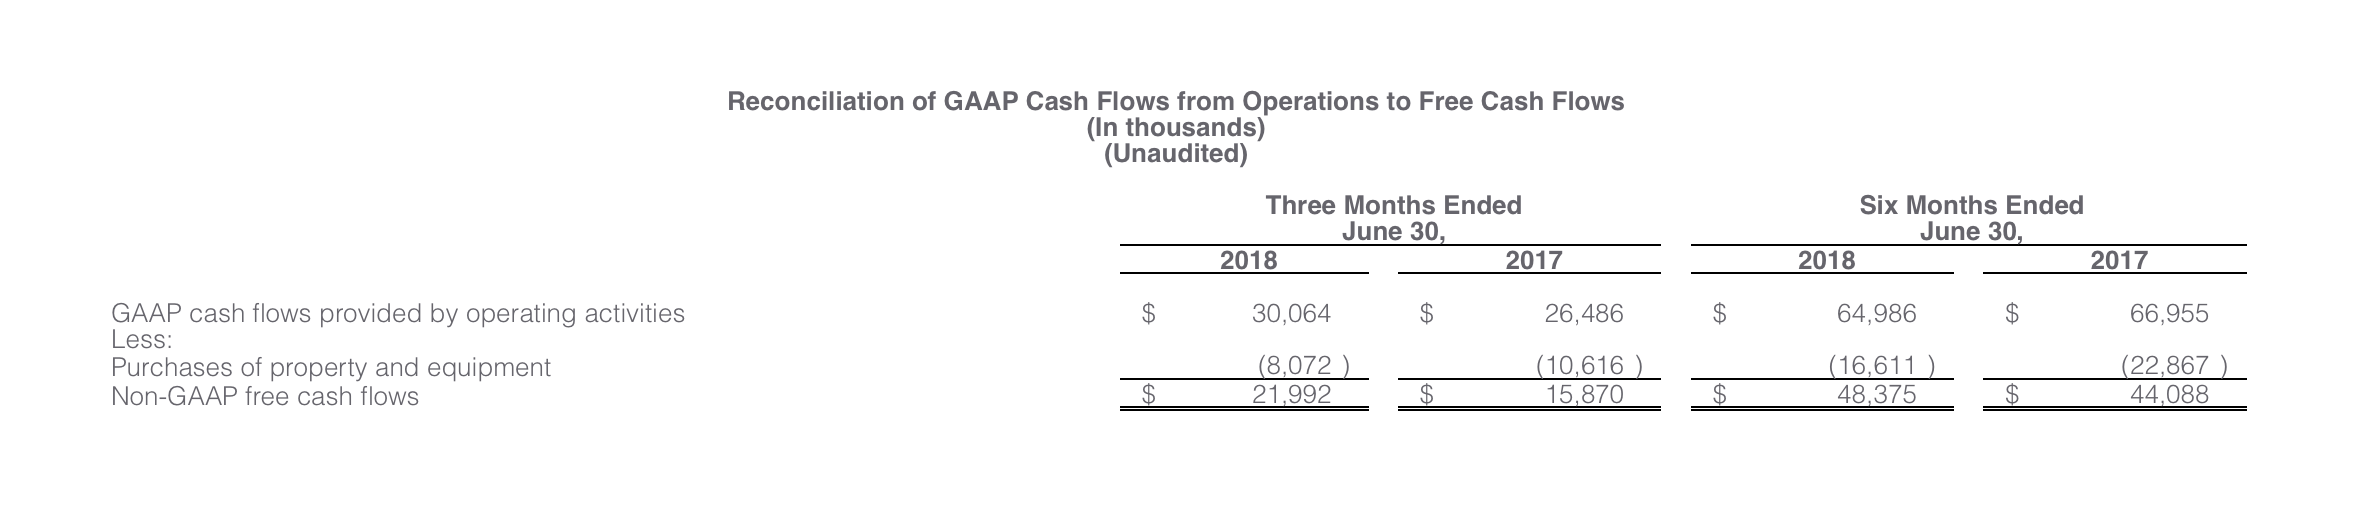 Proofpoint reconciliation of gaap cash flows from operations